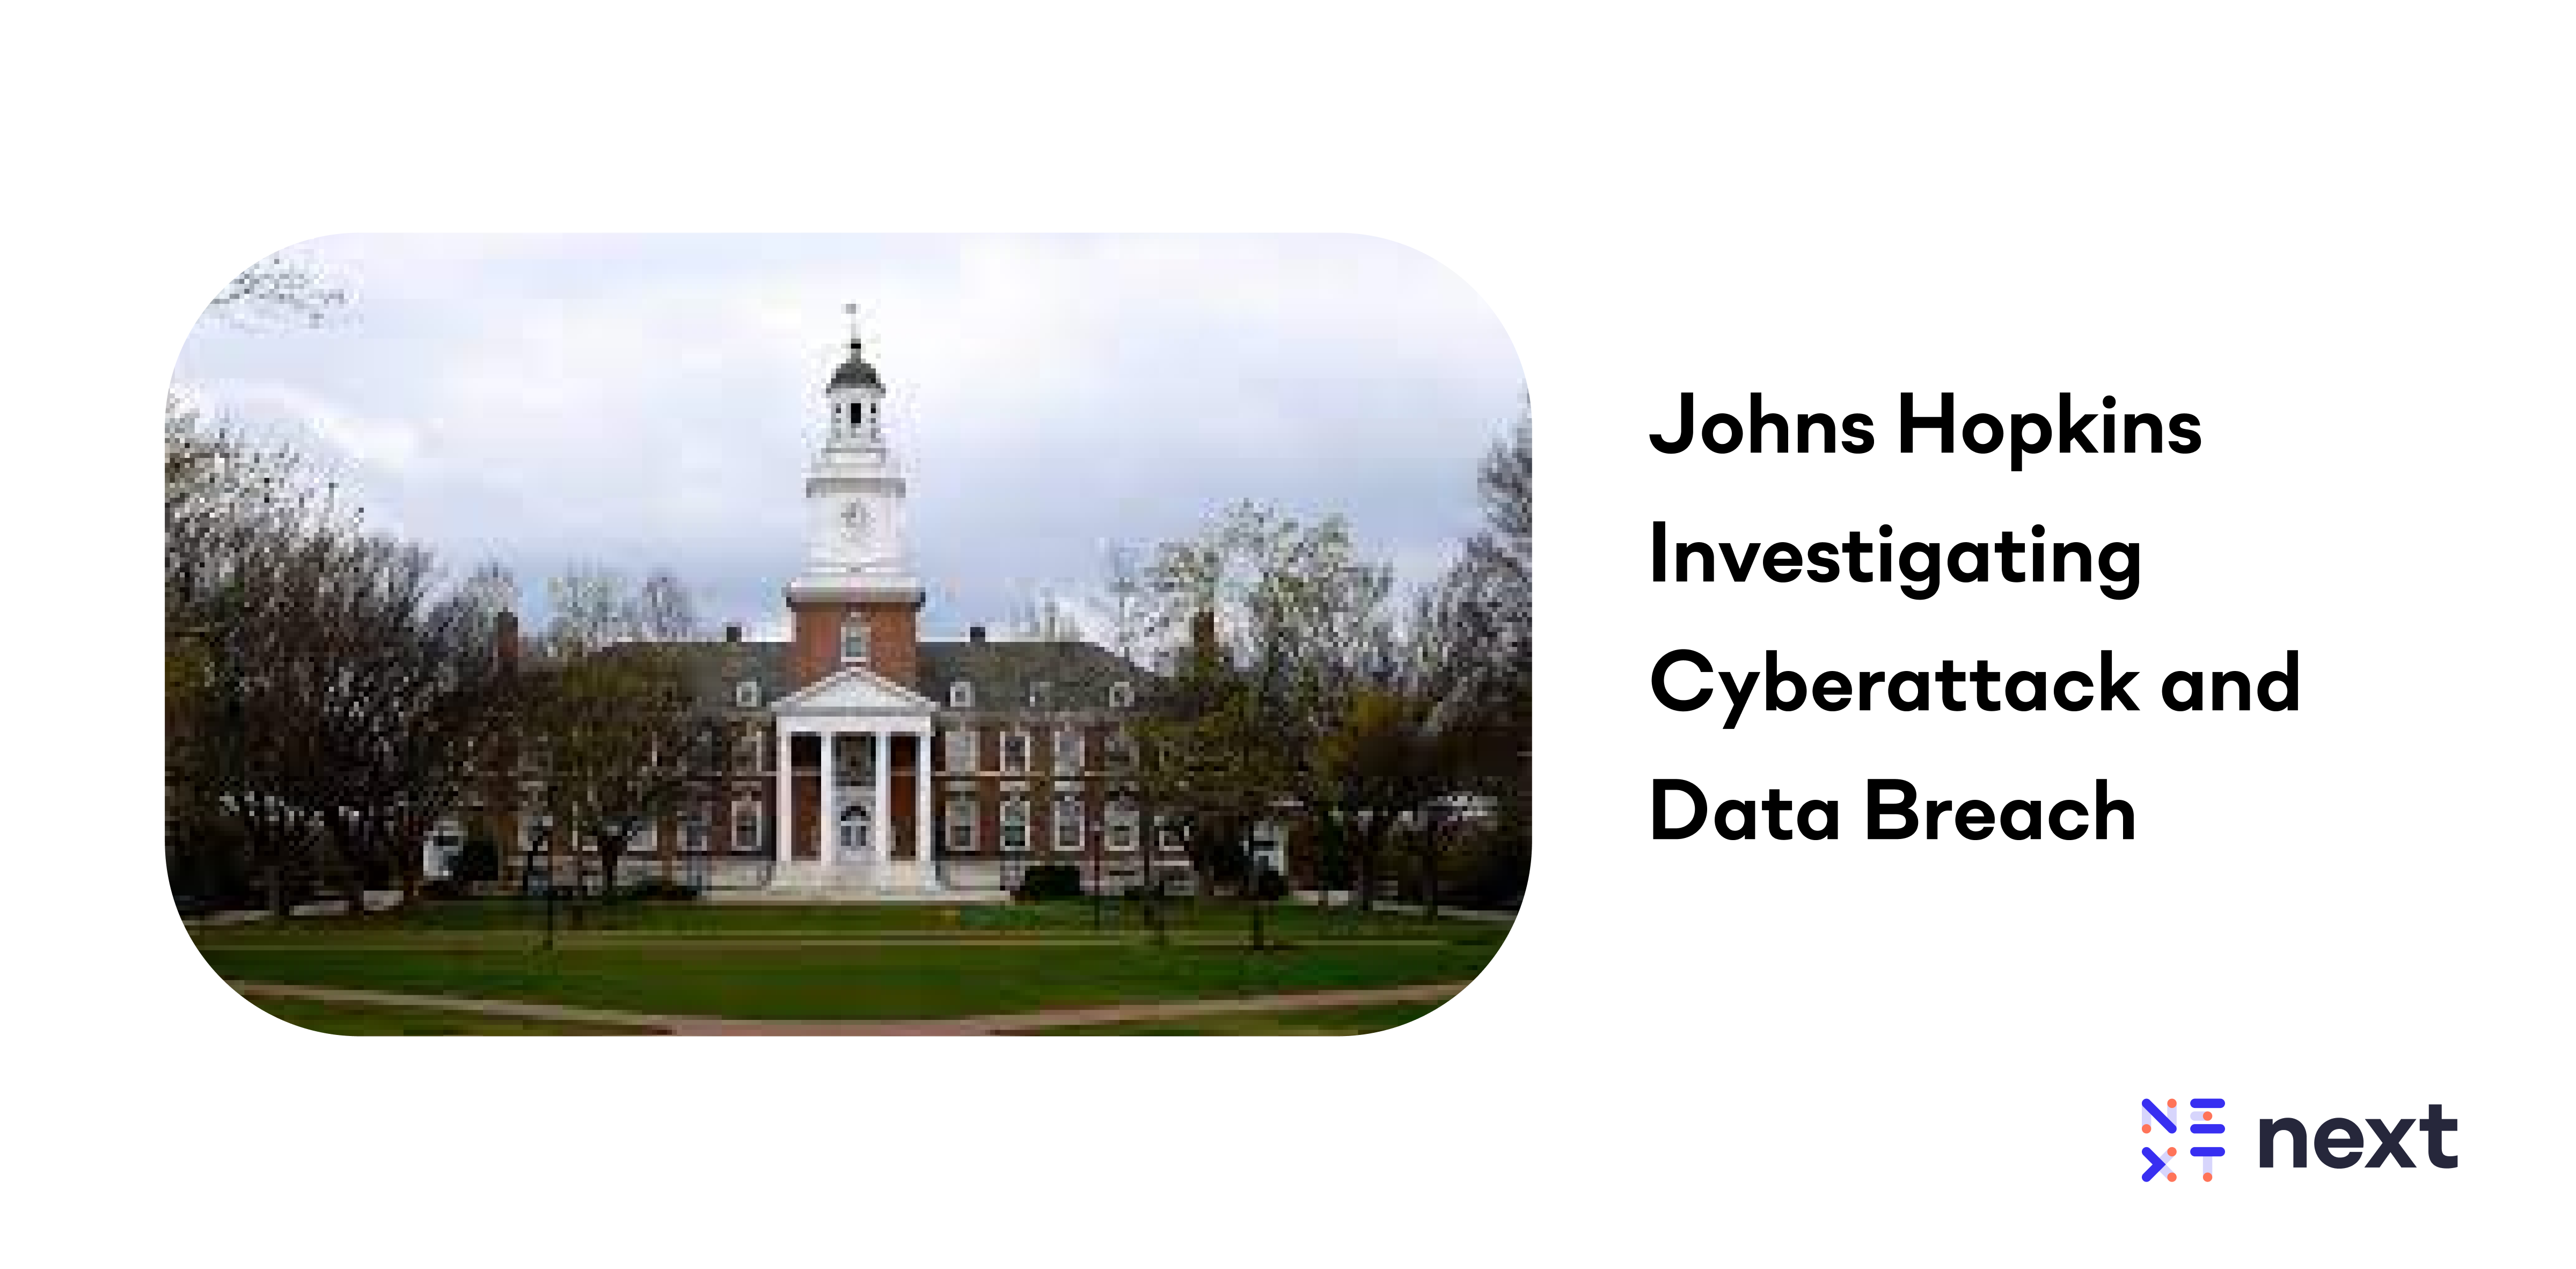 Johns Hopkins Investigating Cyberattack and Data Breach